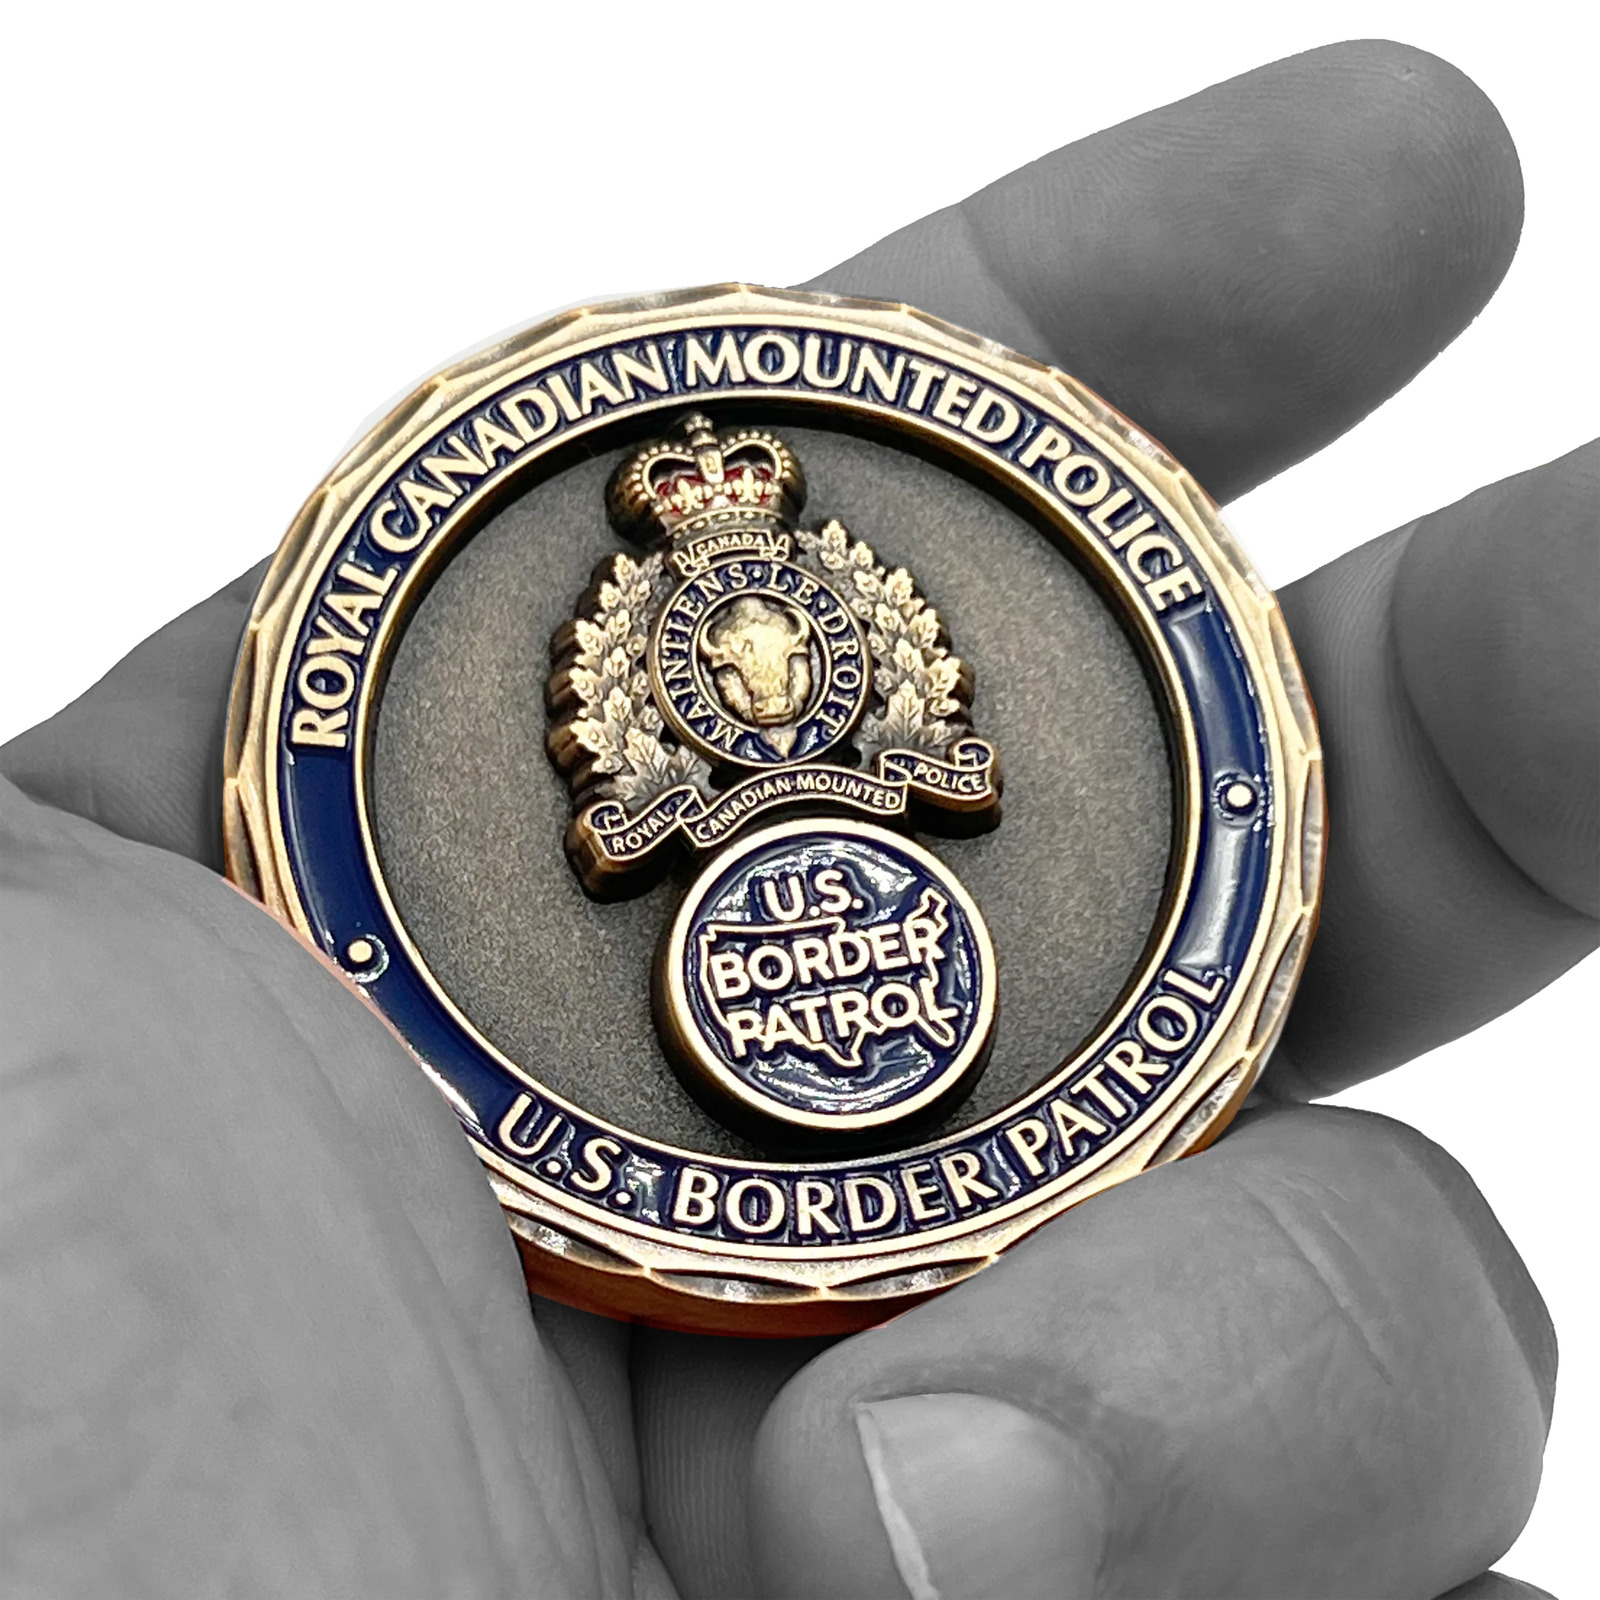 BL4-021 RCMP Challenge Coin Royal Canadian Mounted Police CBP Border Patrol Agen